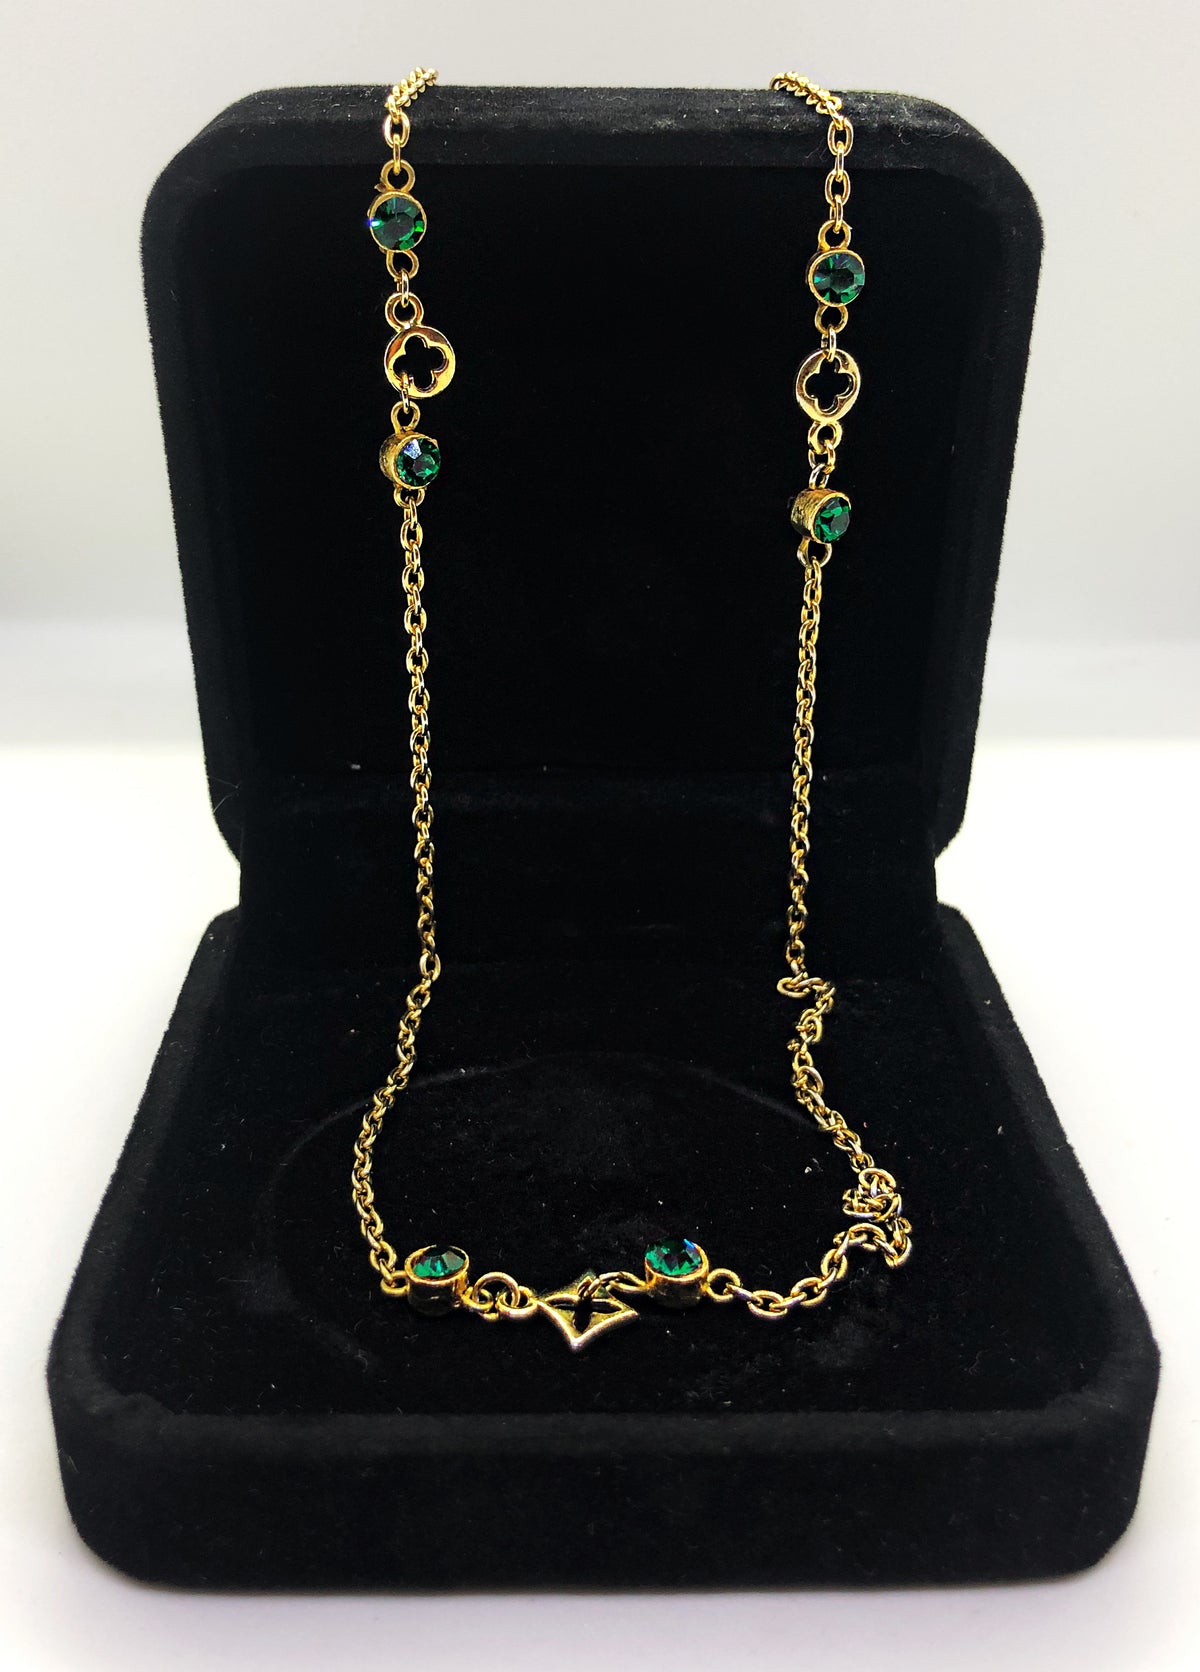 Gold LV style short necklace with green studs